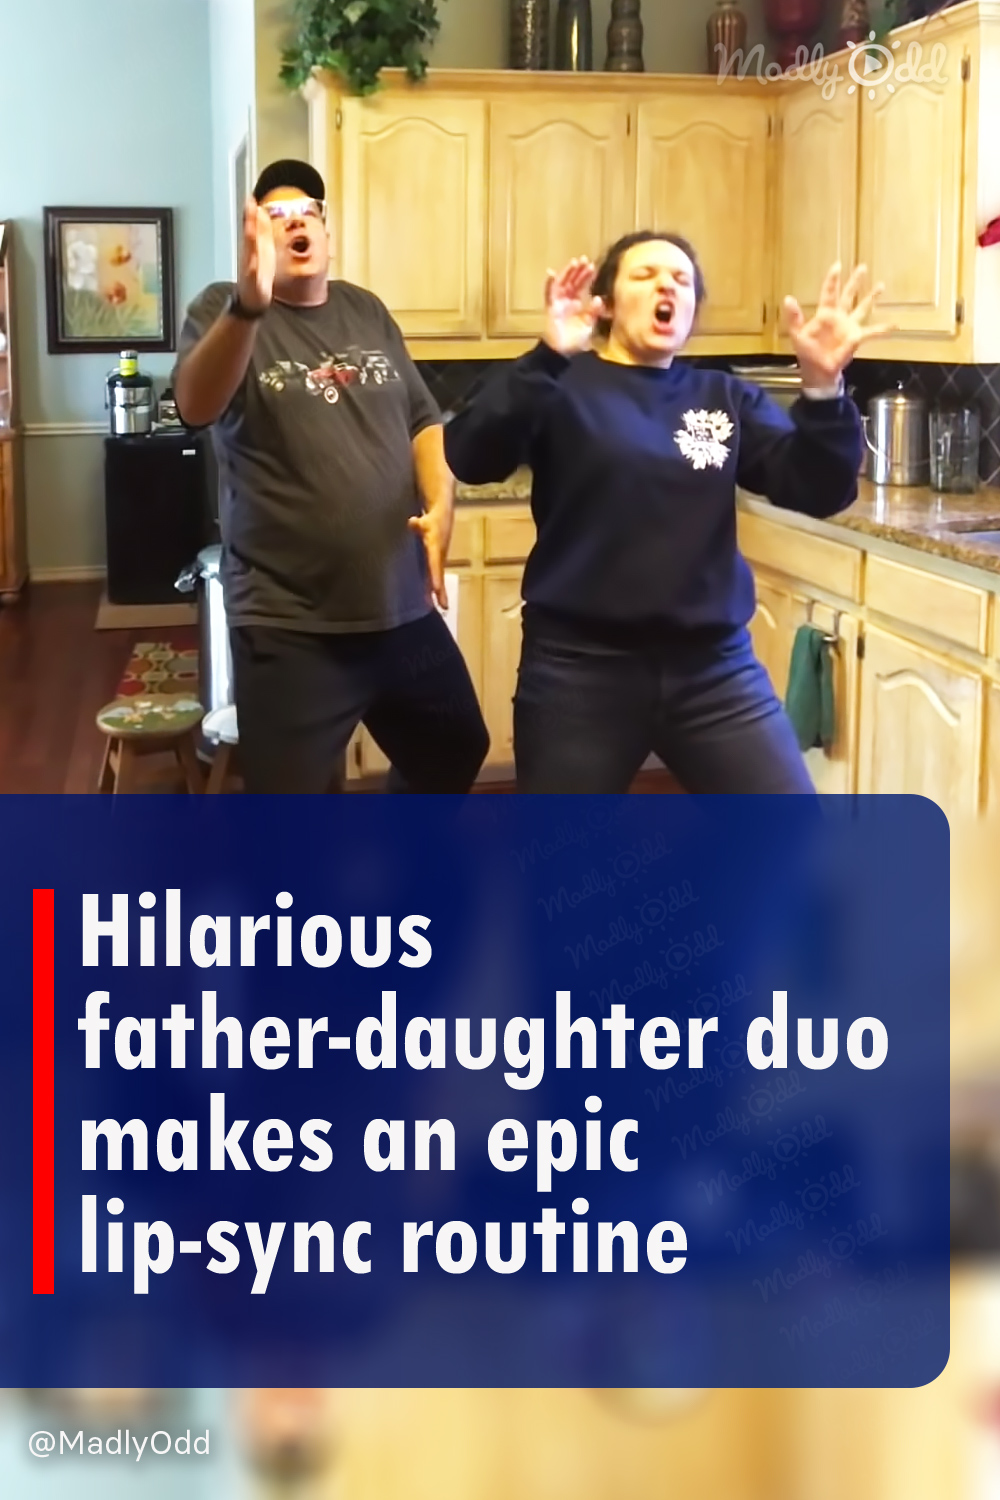 Hilarious father-daughter duo makes an epic lip-sync routine